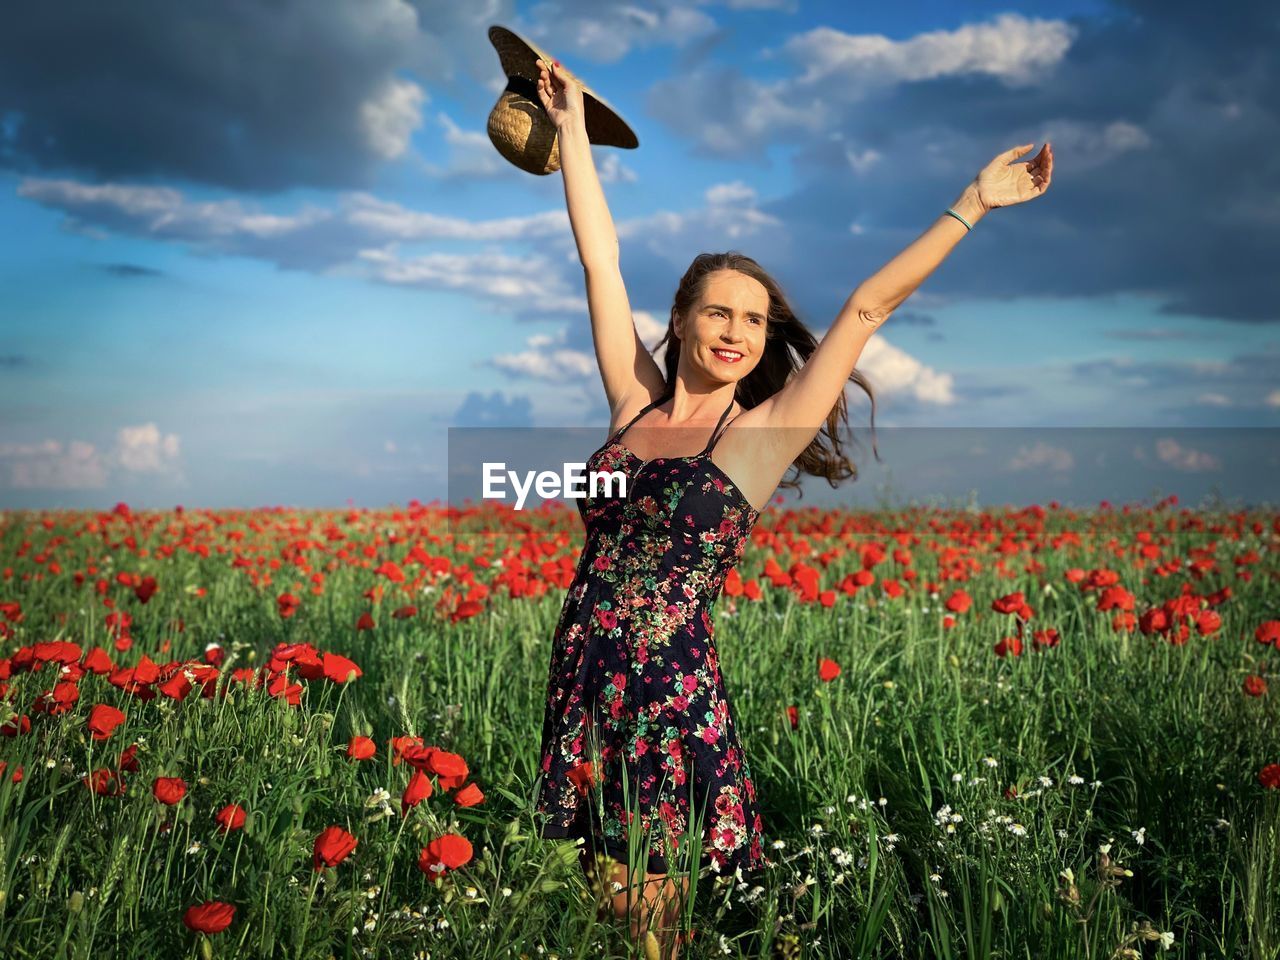 Portrait of happy young woman wearing dress and straw hat in a field of poppies